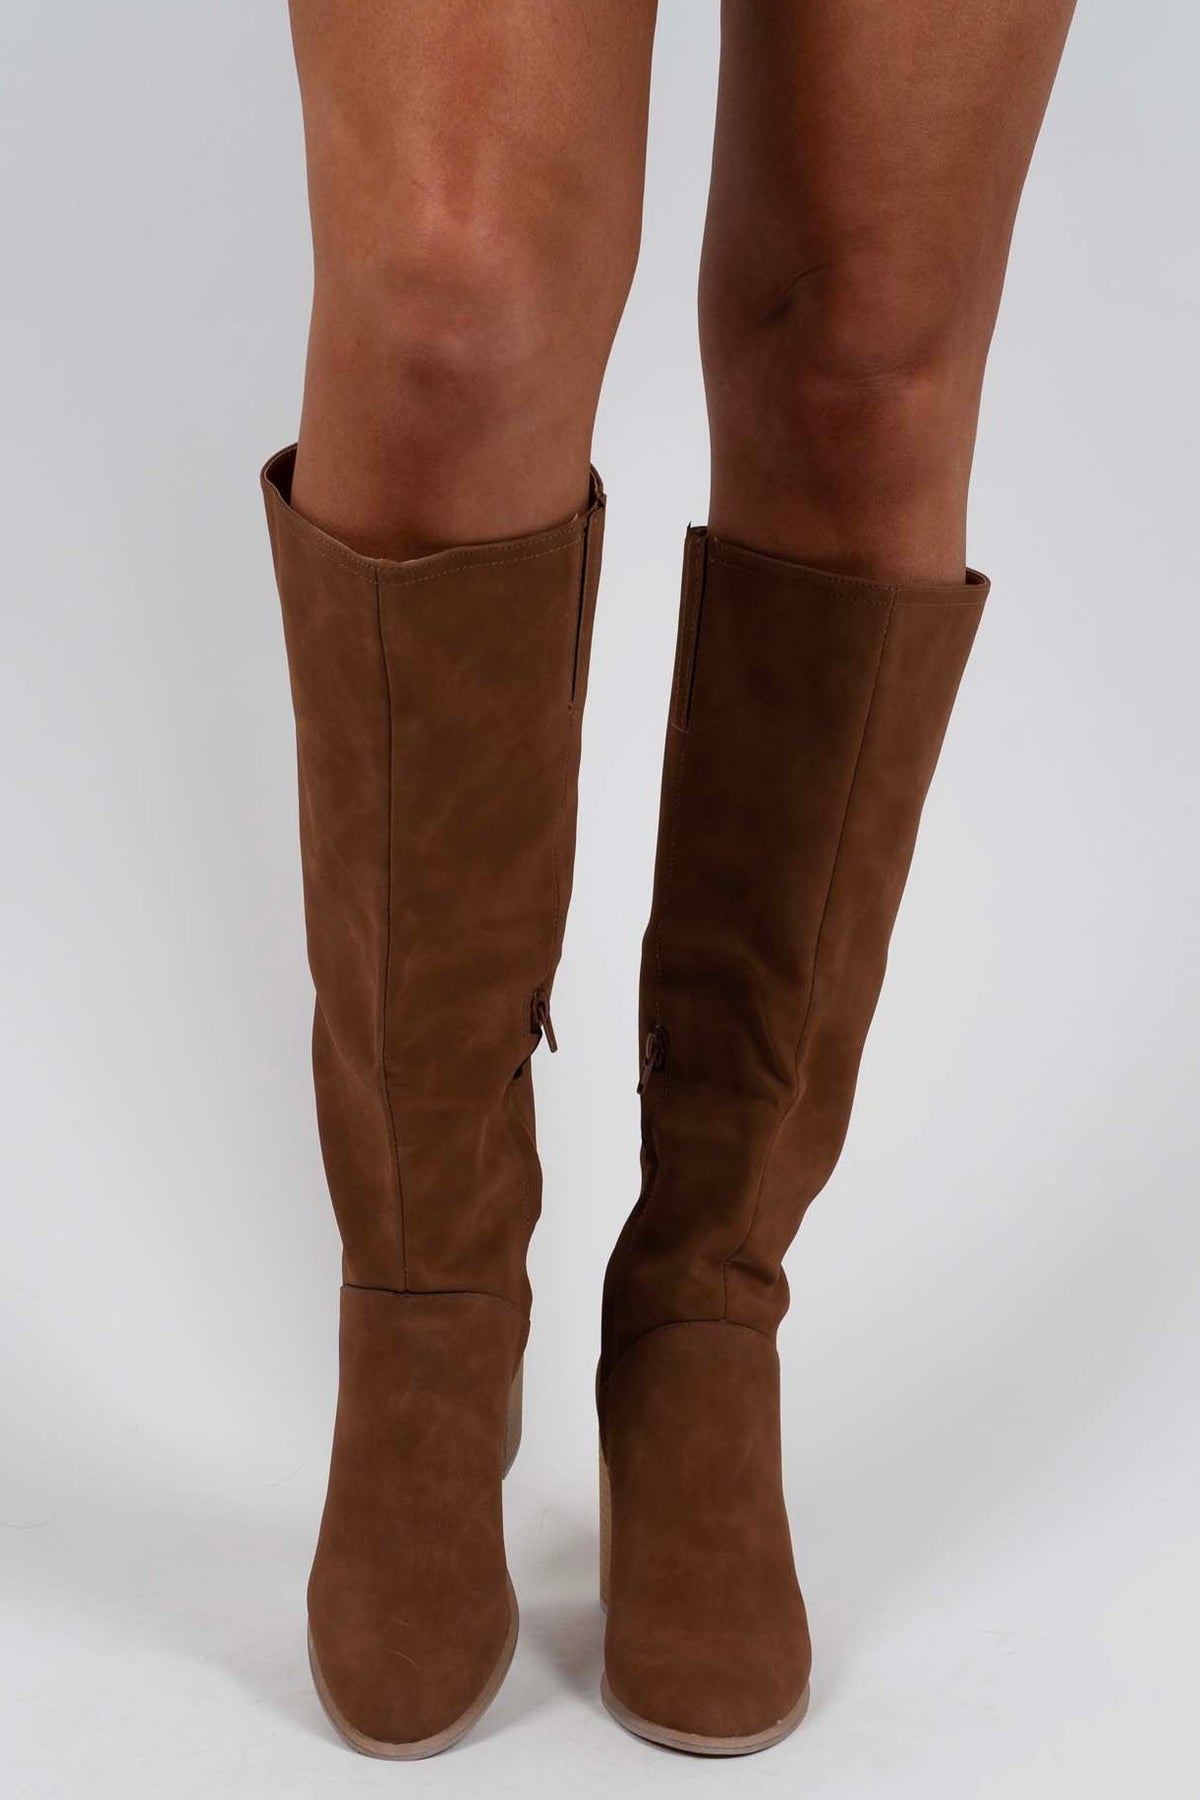 Shiloh Boots (Brown)